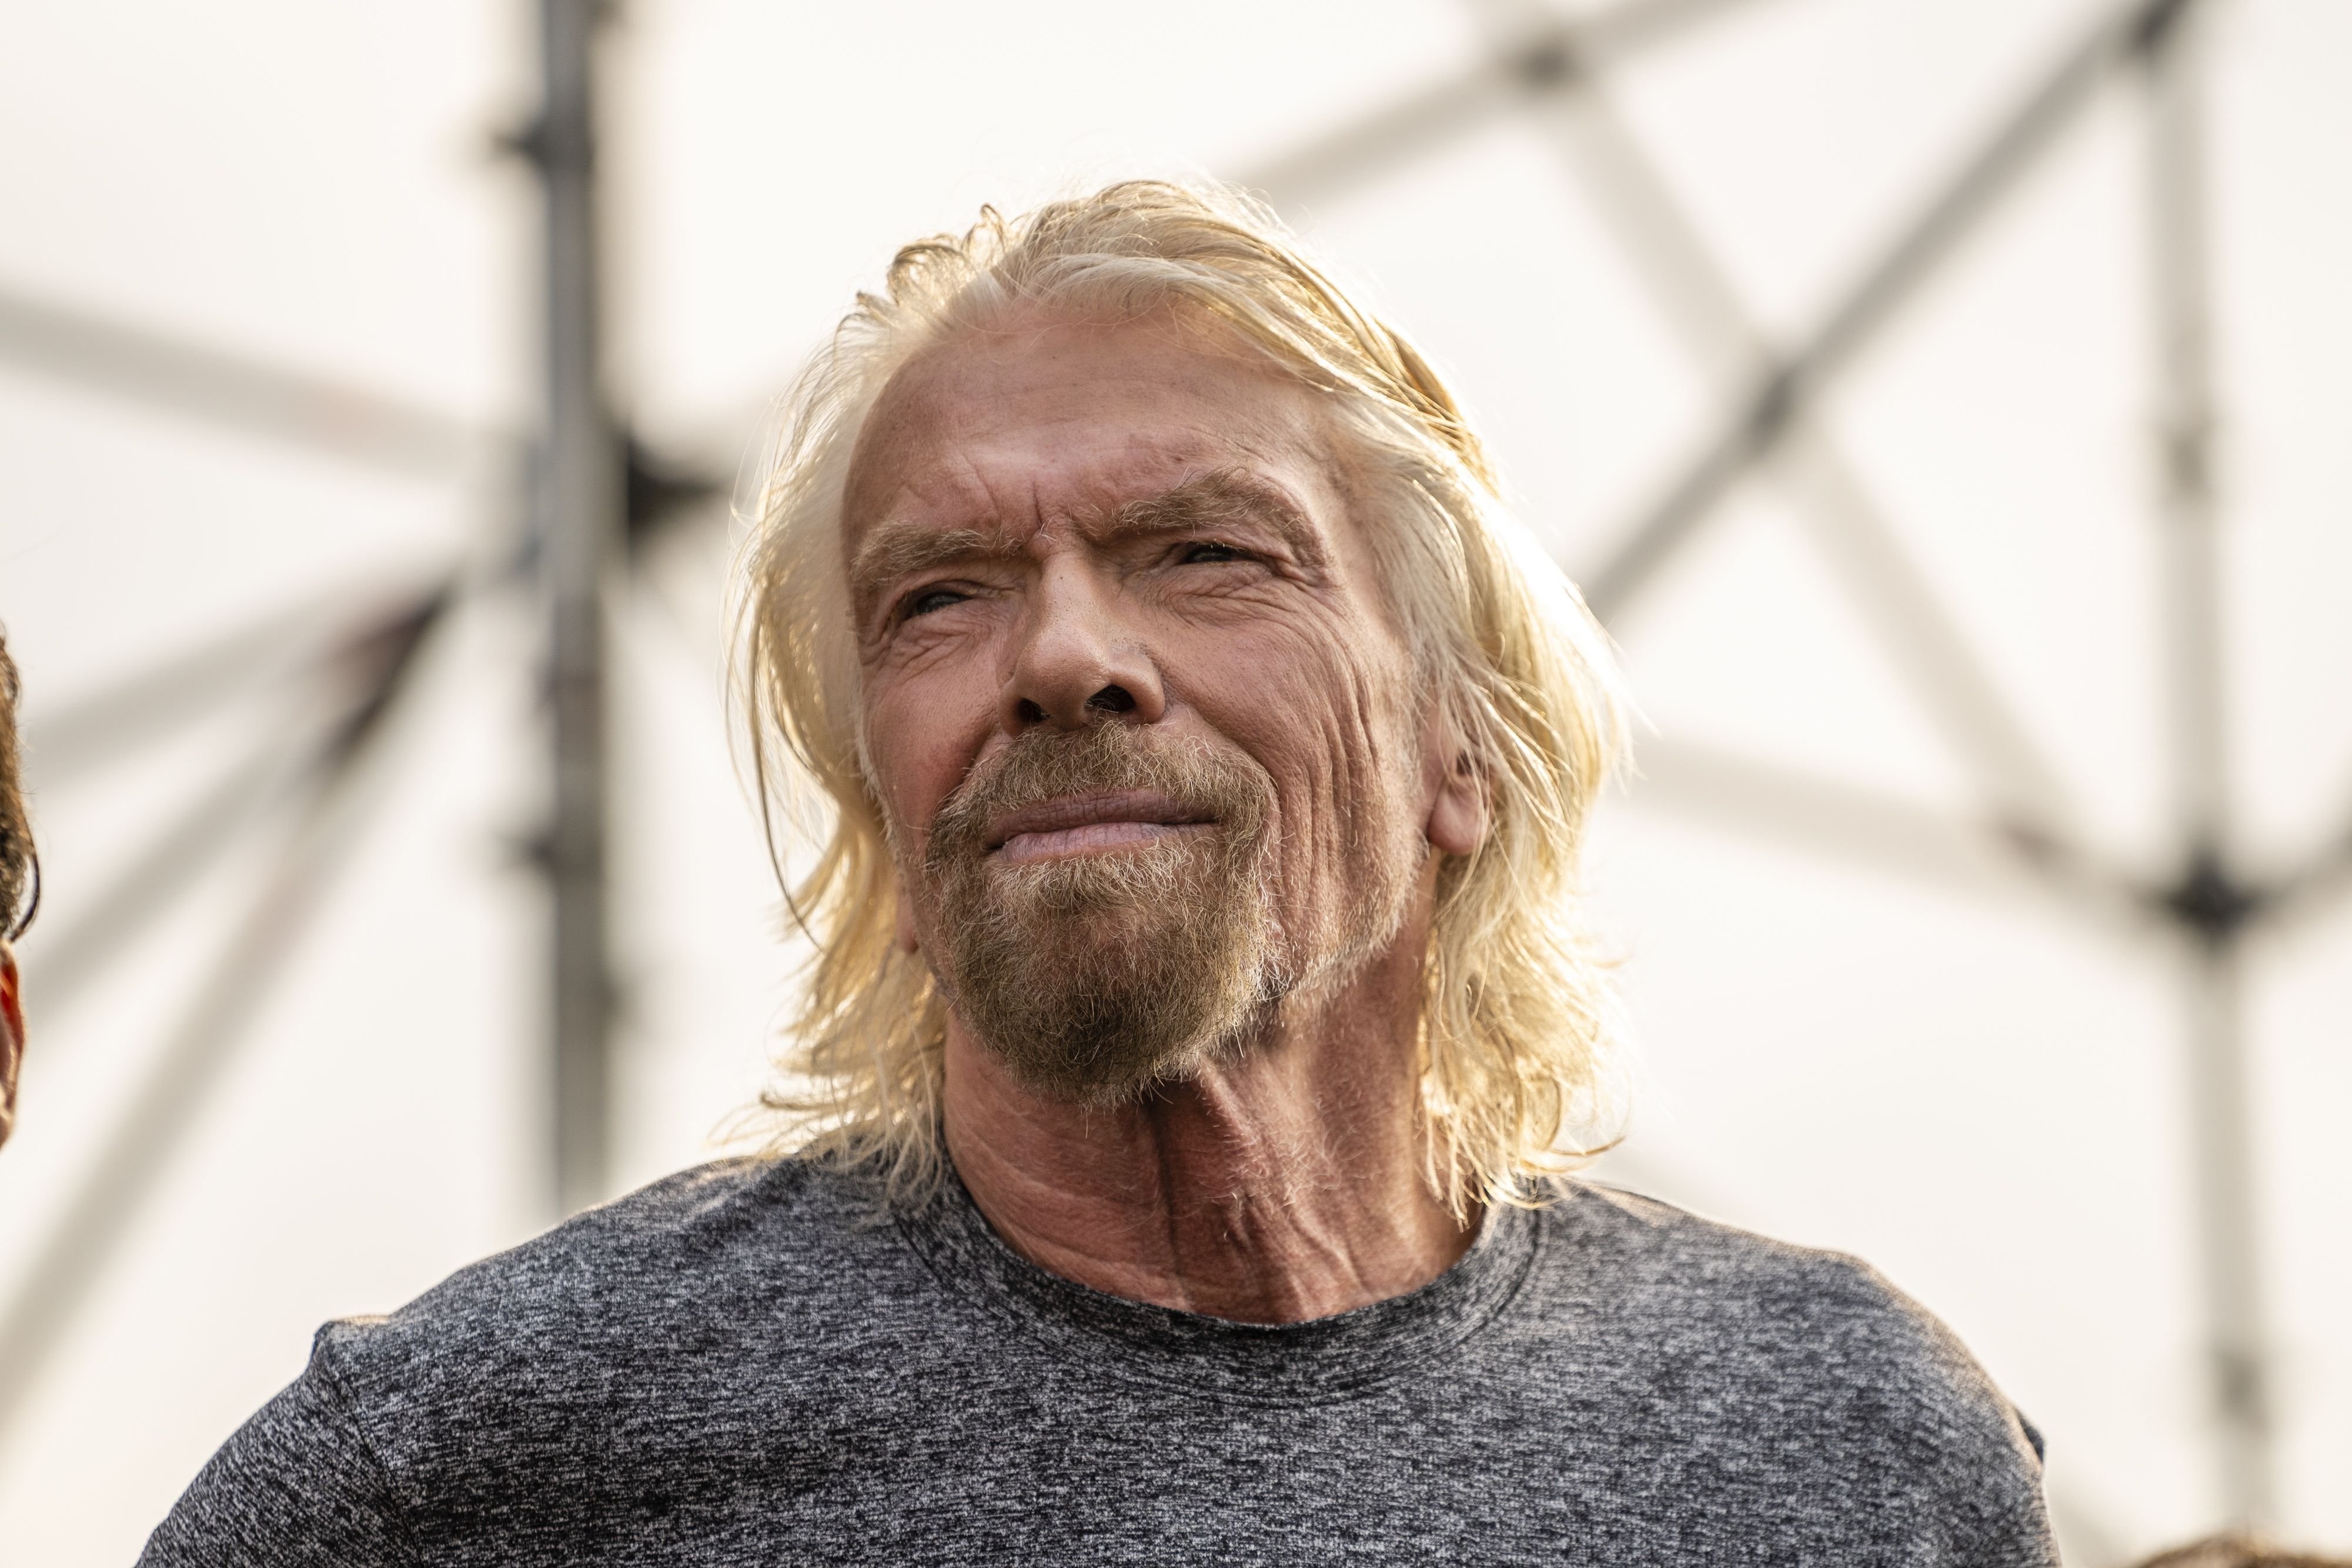 Richard Branson at a news conference on Friday, February 22, 2019 | Photo: Getty Images